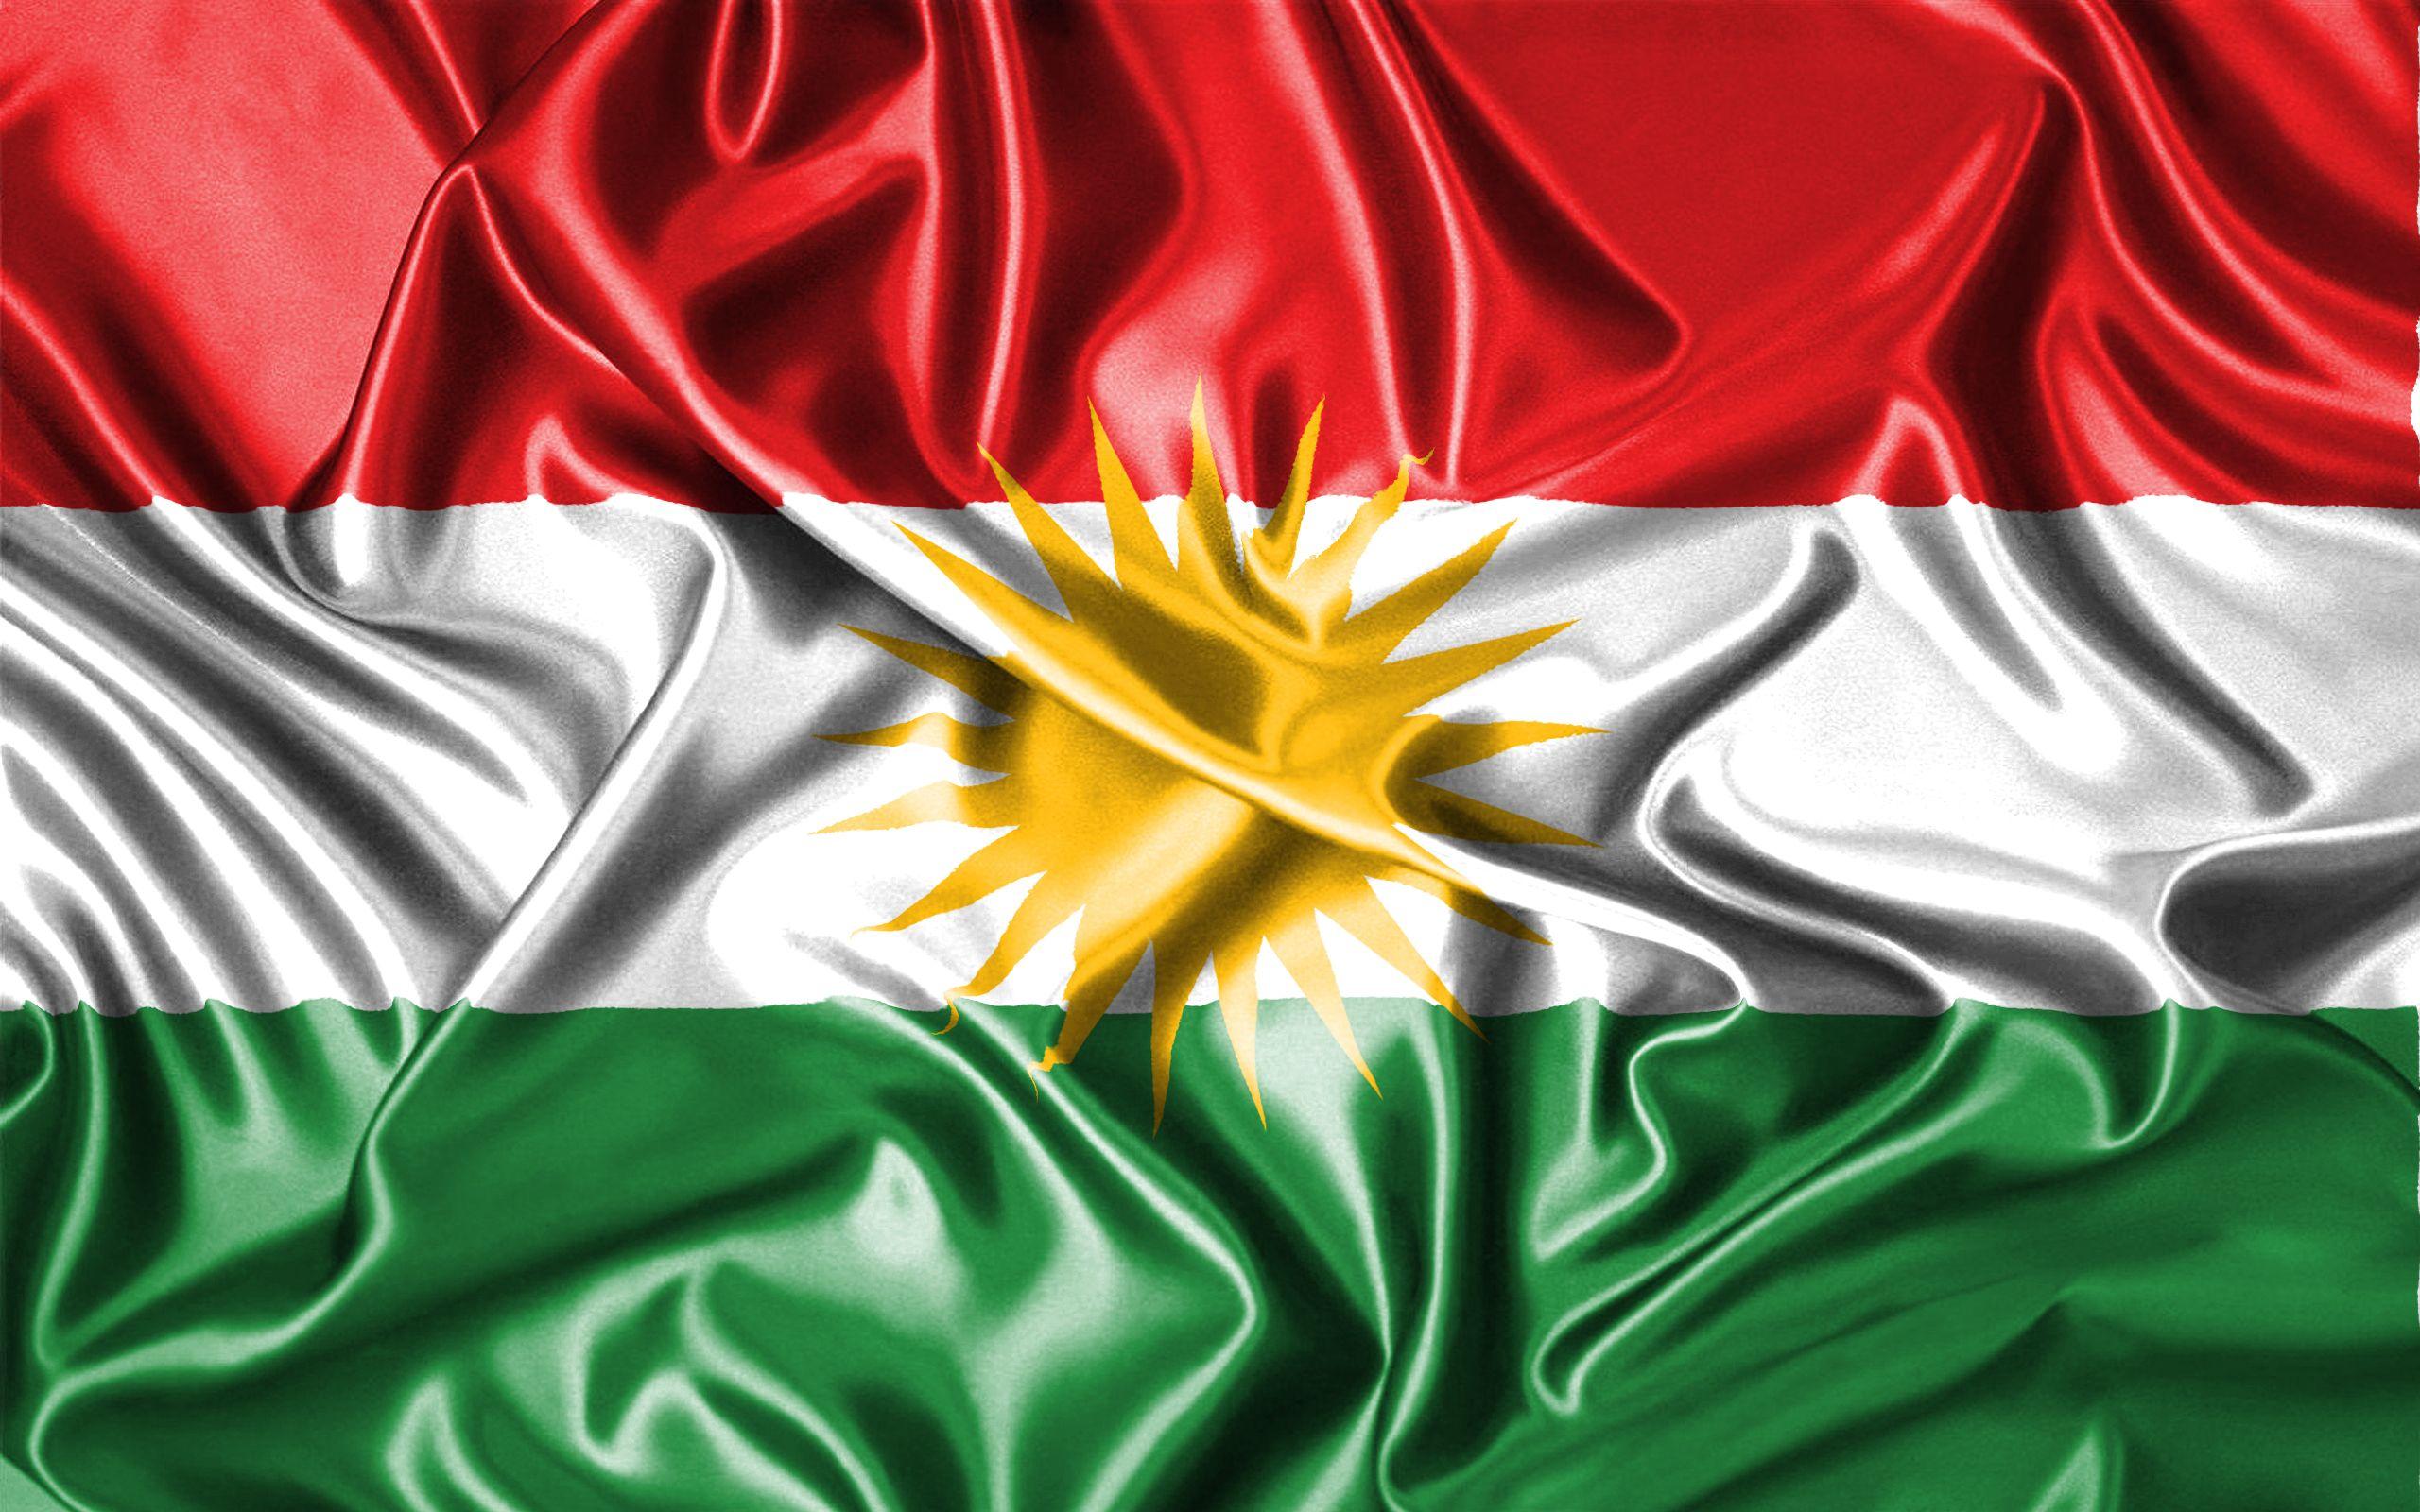 Kurdistan Flag, With Different Texture And Fabrics By Saiwan S